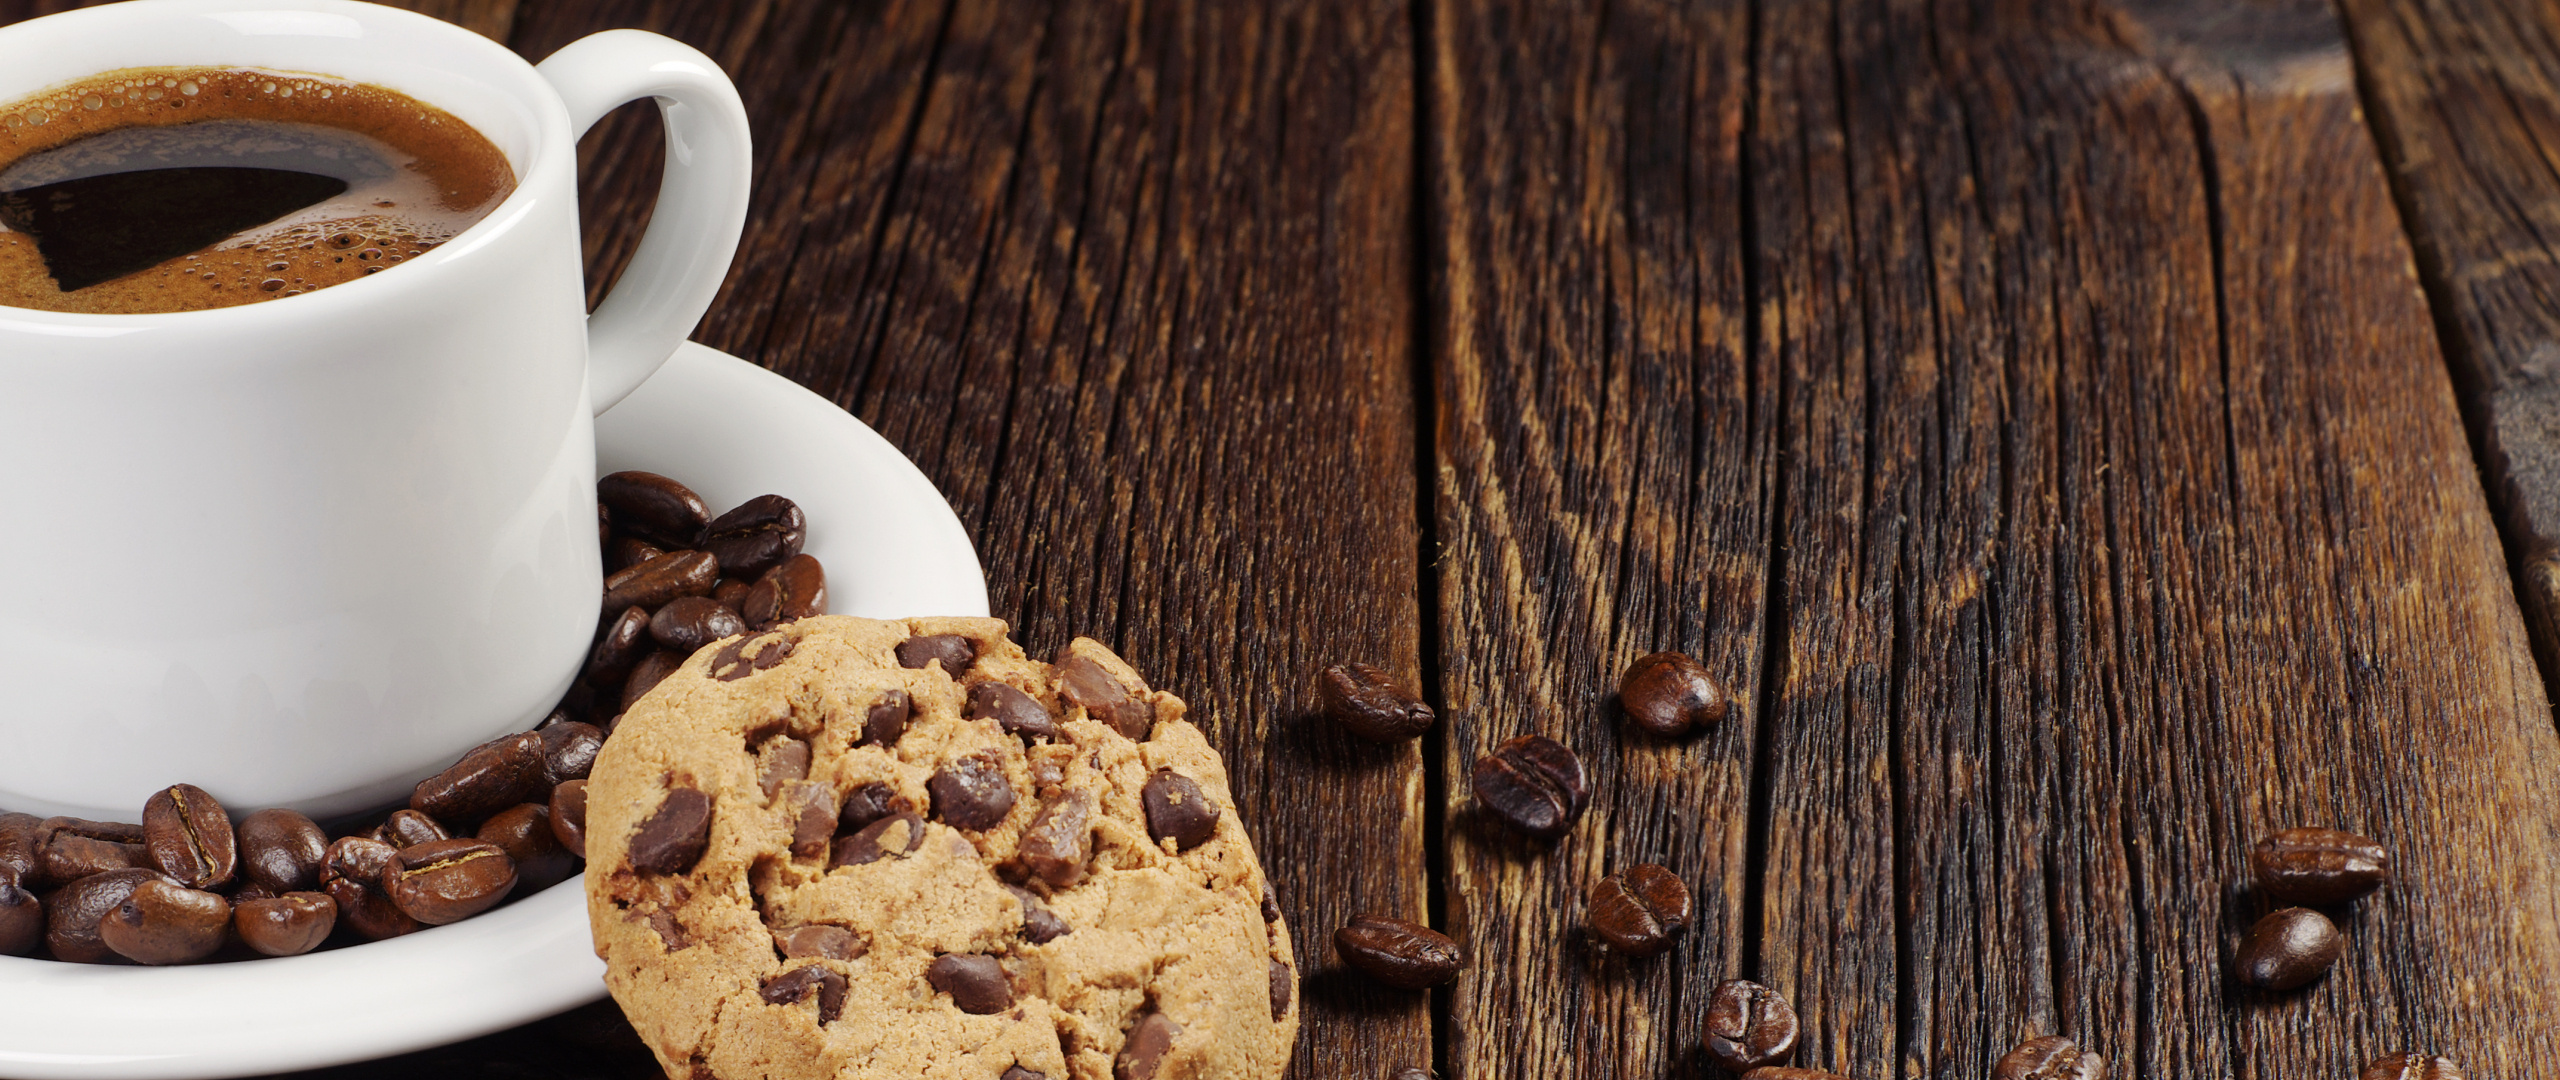 Biscuit: A drop cookie that features chocolate chips or chocolate morsels. 2560x1080 Dual Screen Wallpaper.